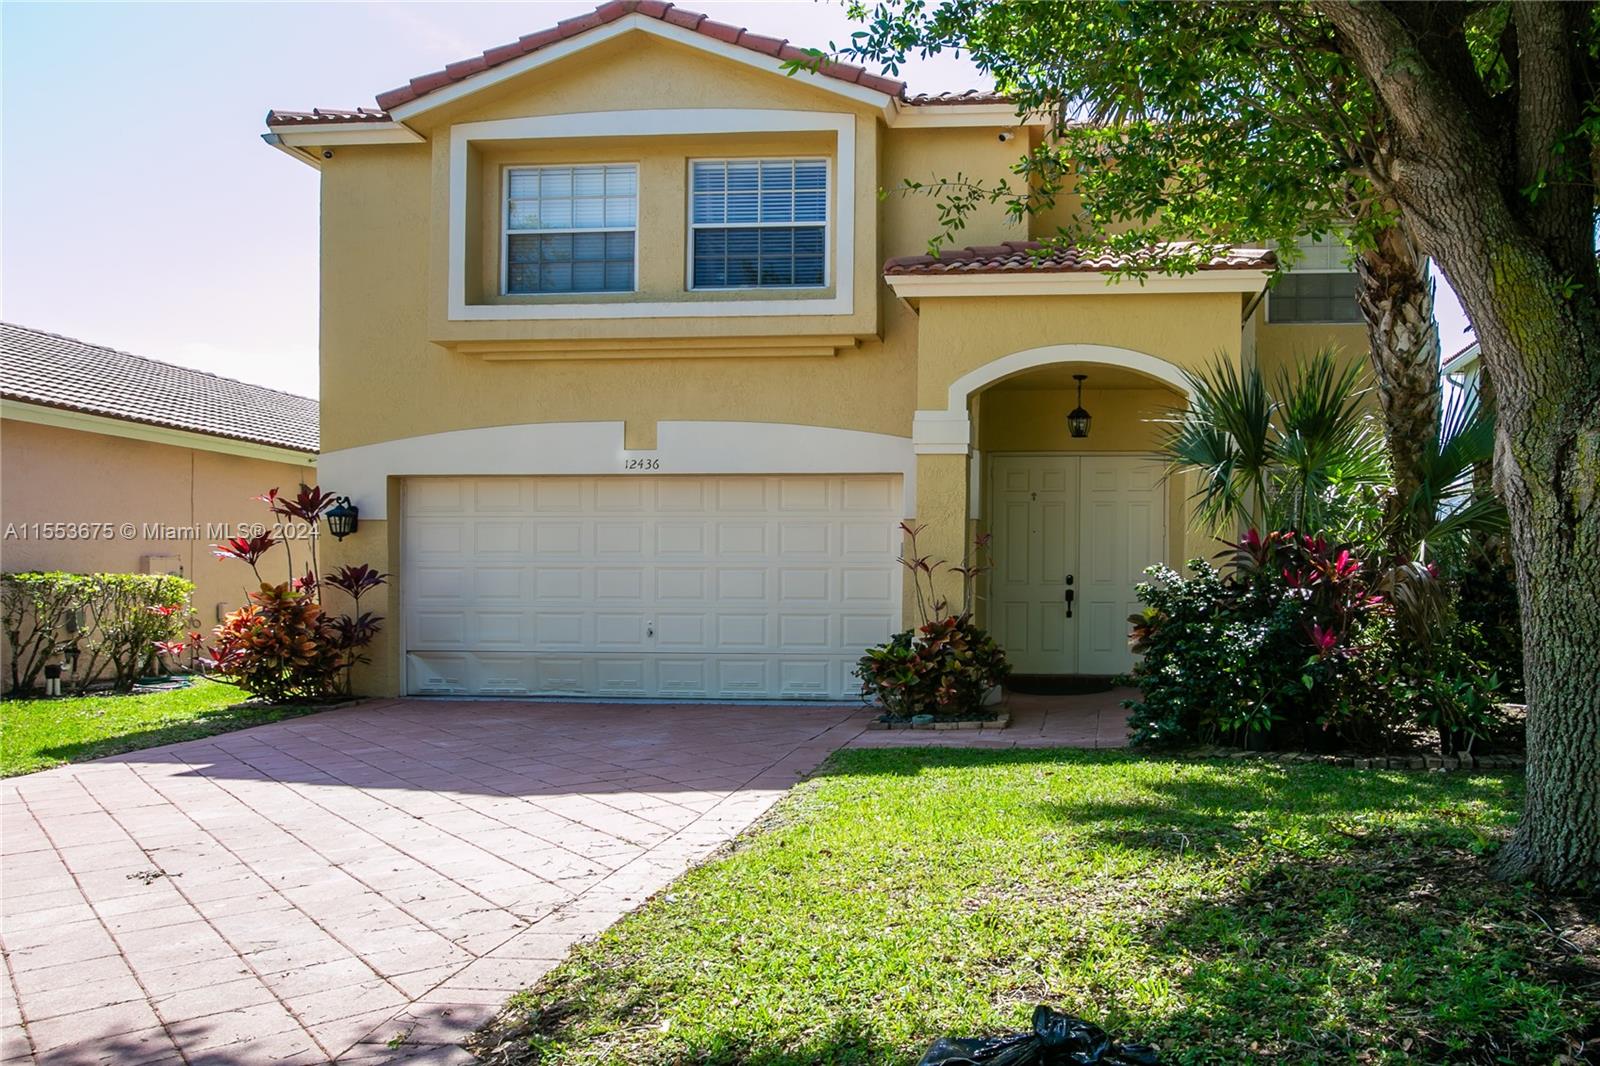 12436 NW 53rd St, Coral Springs, Florida 33076, 4 Bedrooms Bedrooms, ,2 BathroomsBathrooms,Residential,For Sale,12436 NW 53rd St,A11553675